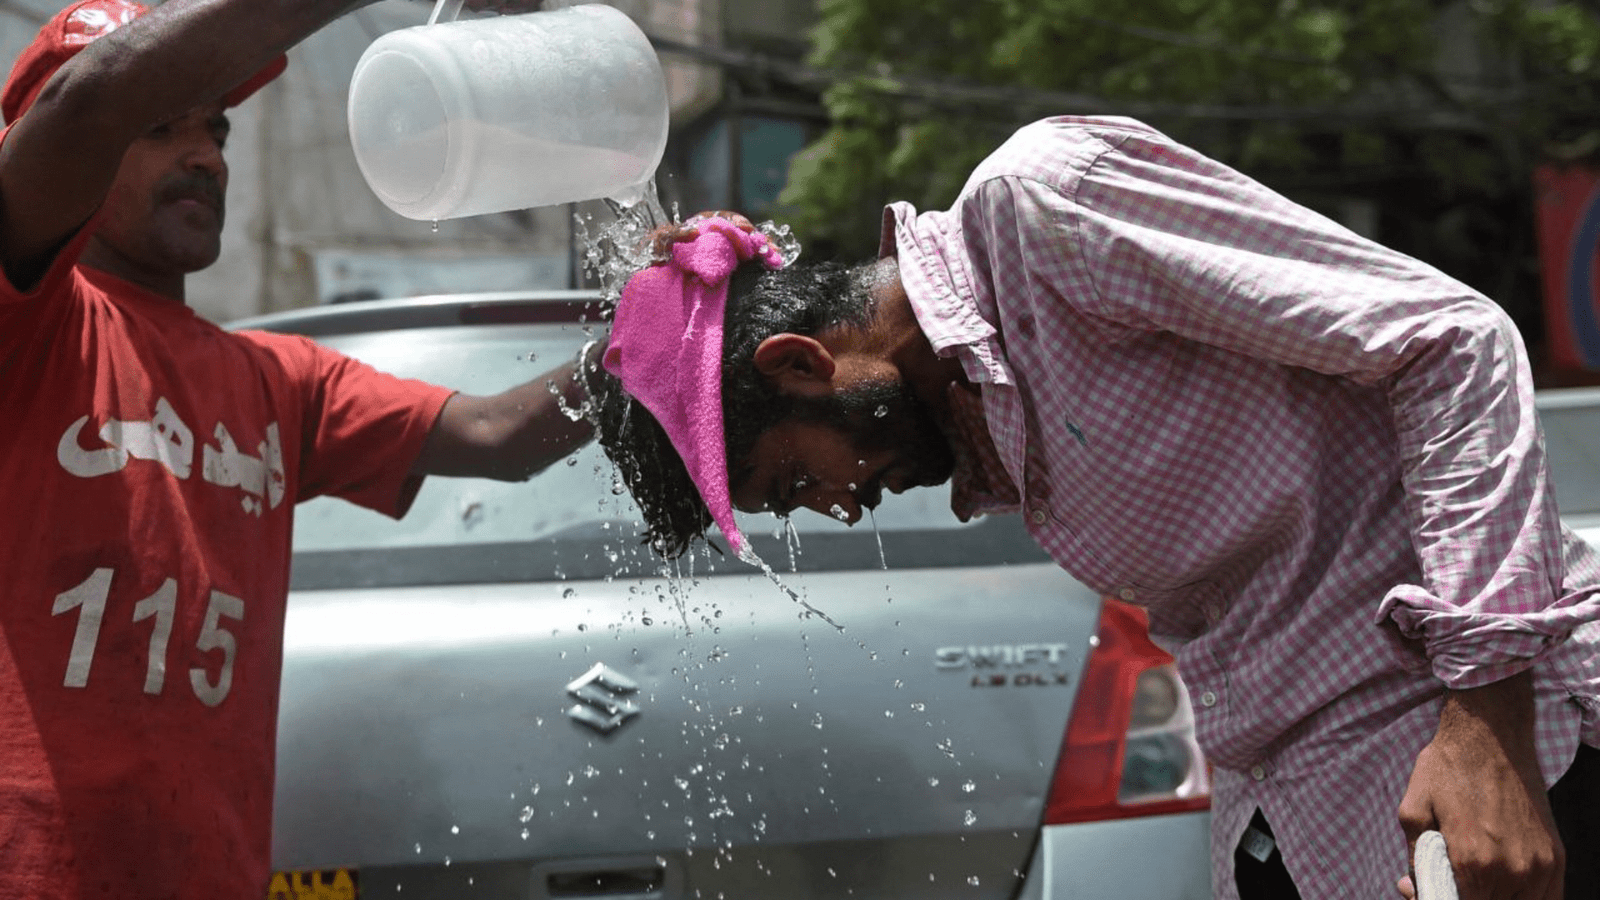 Punjab likely to face heatwave from May 12: PMD